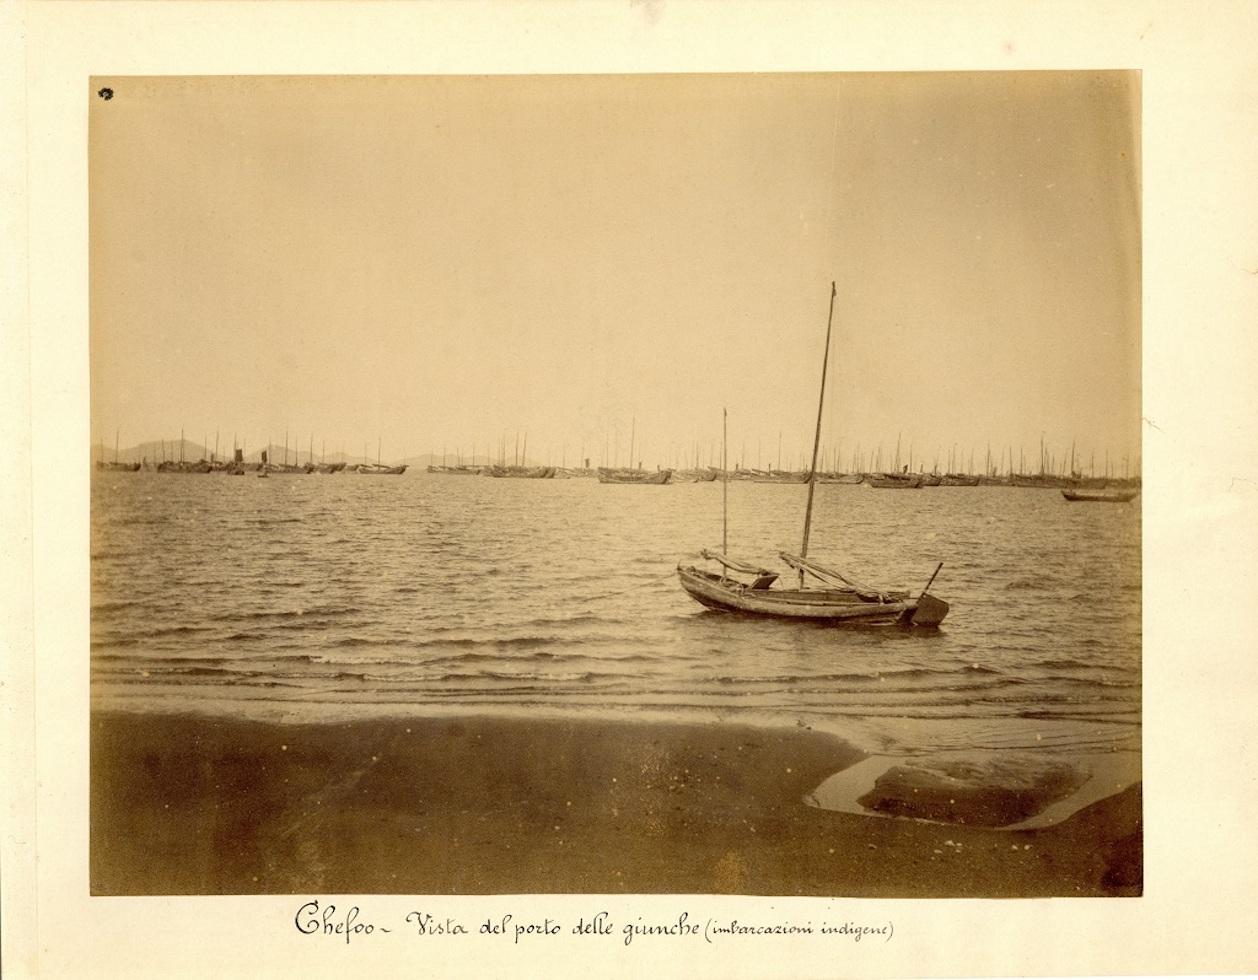 Unknown Black and White Photograph - Chefoo, Harbour of Junks - Ancient Albumen Print 1880/1900